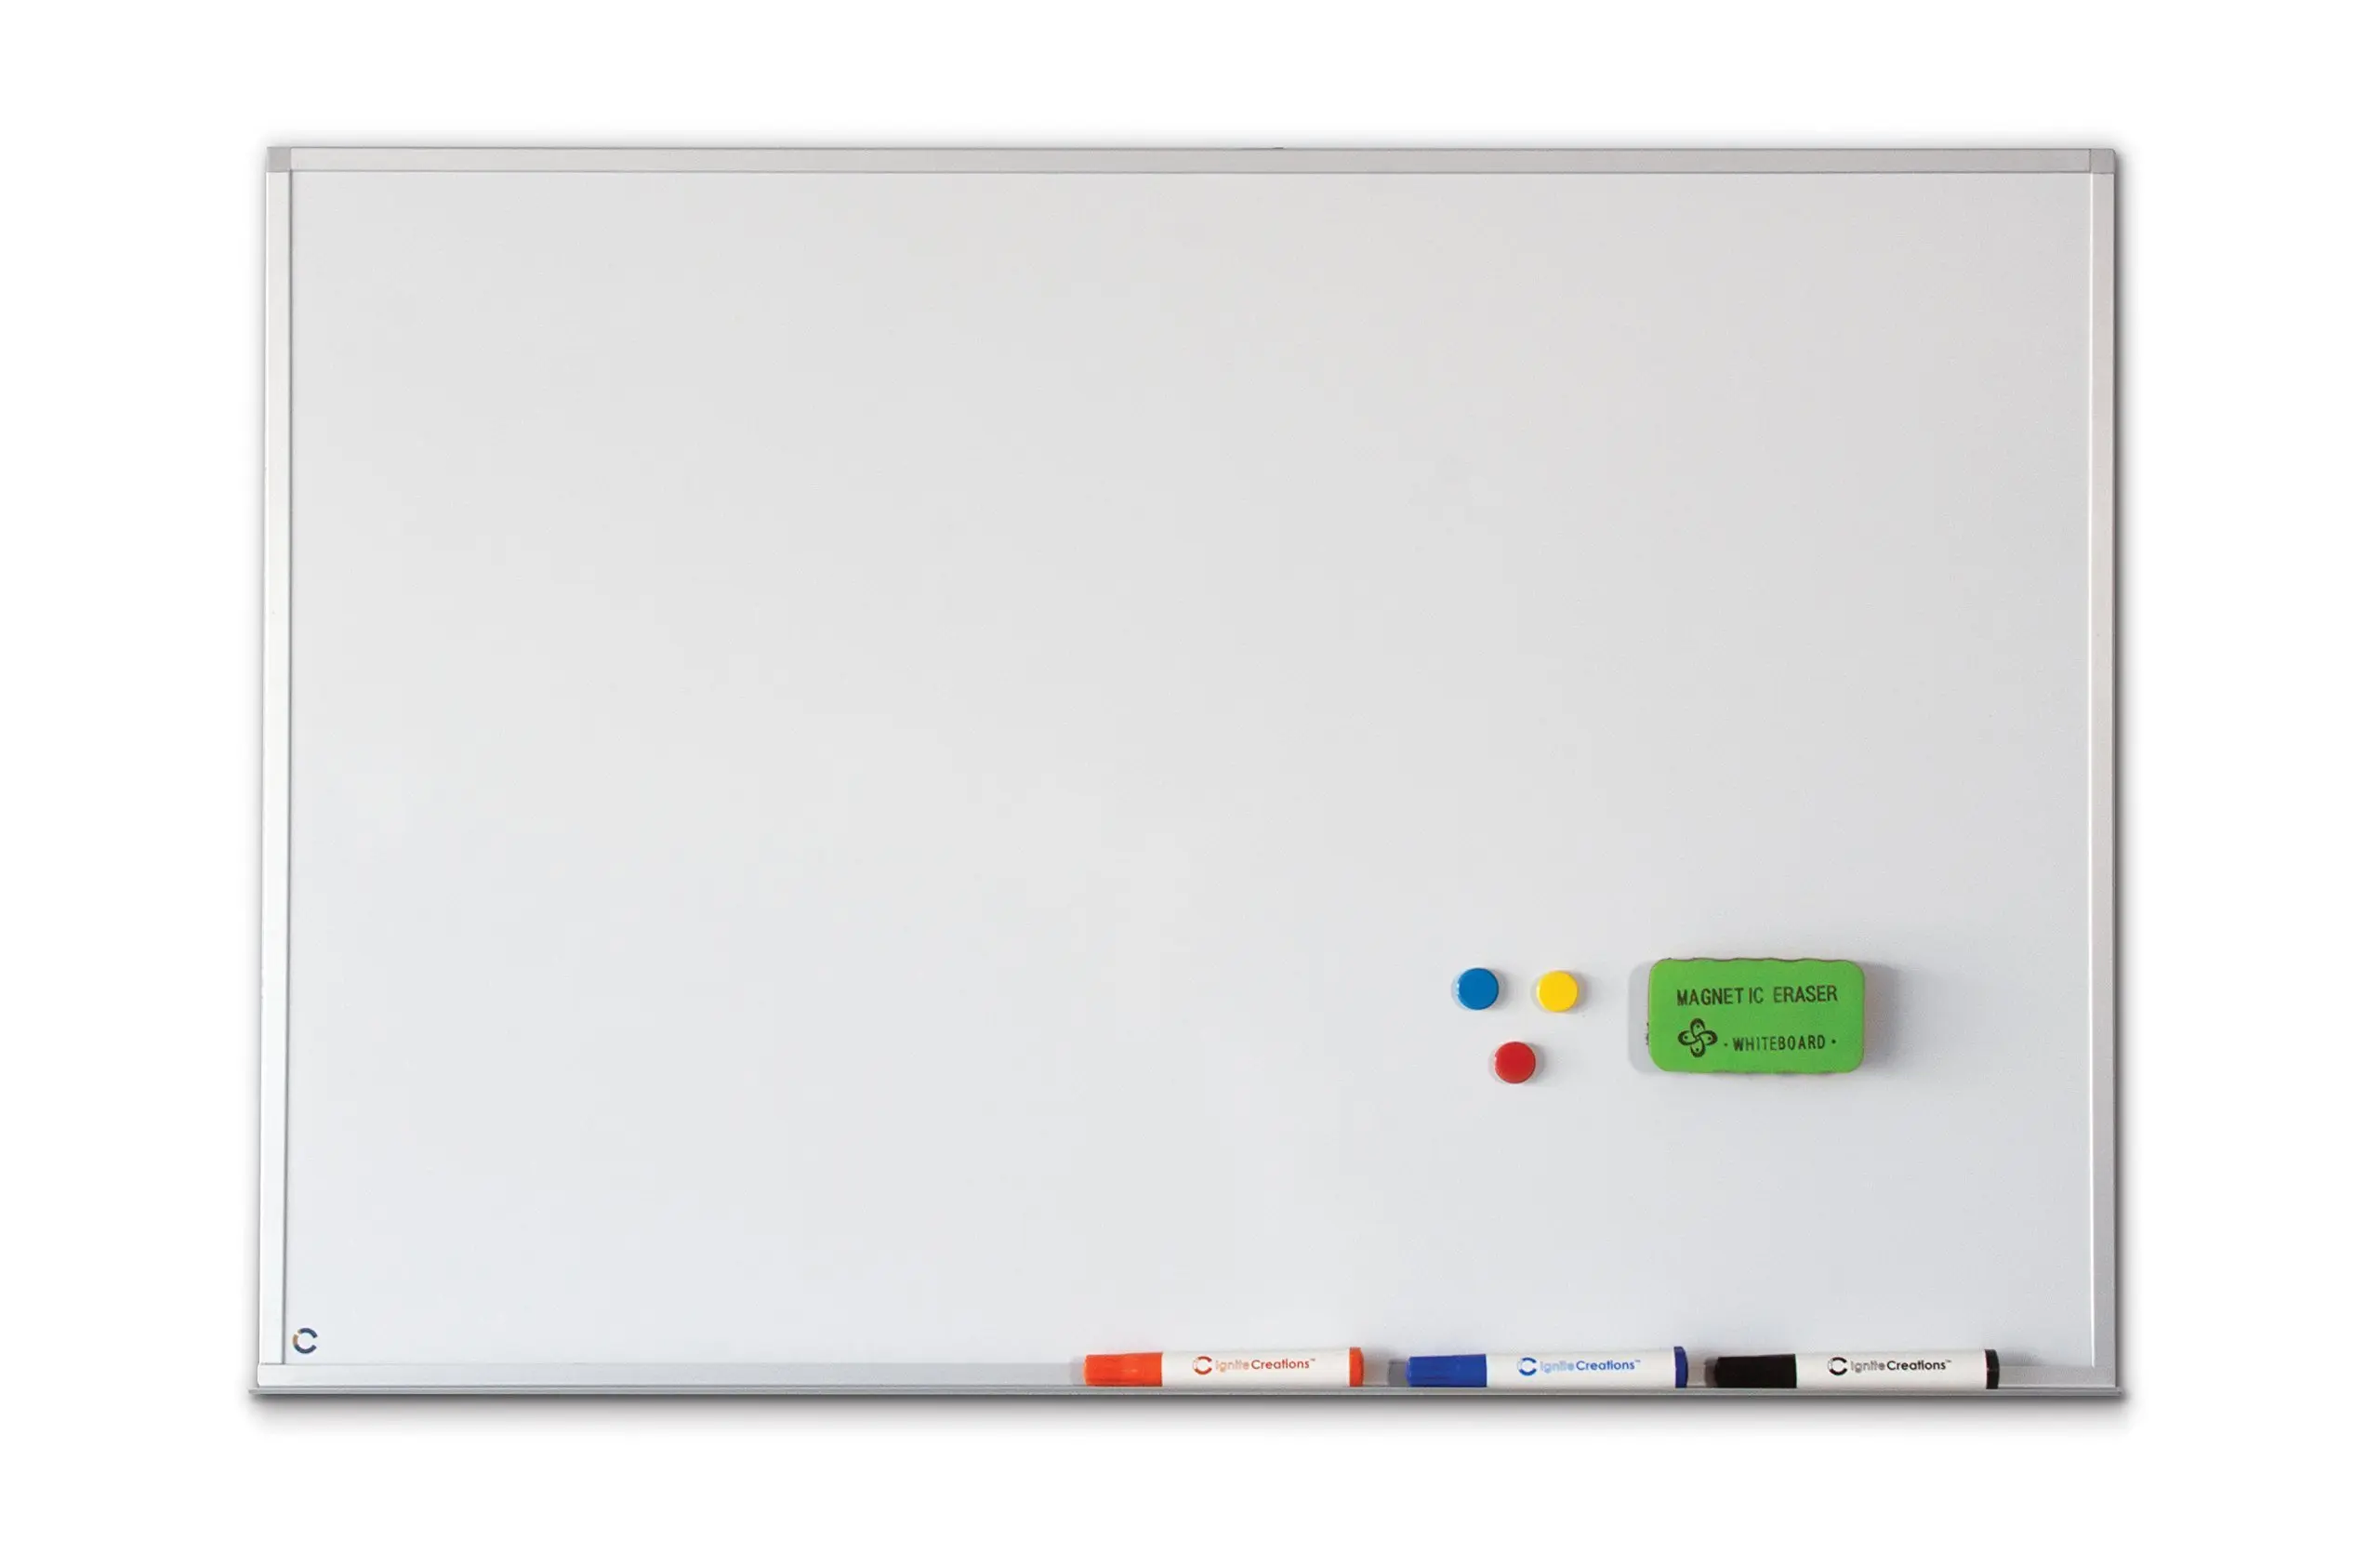 Buy Highest Quality Dry Erase Board Whiteboard Kit 1 24 X 36 Magnetic White Board 7 Dry Erase Colored Markers 3 Whiteboard Magnets 1 Magnetized Eraser In Cheap Price On Alibaba Com